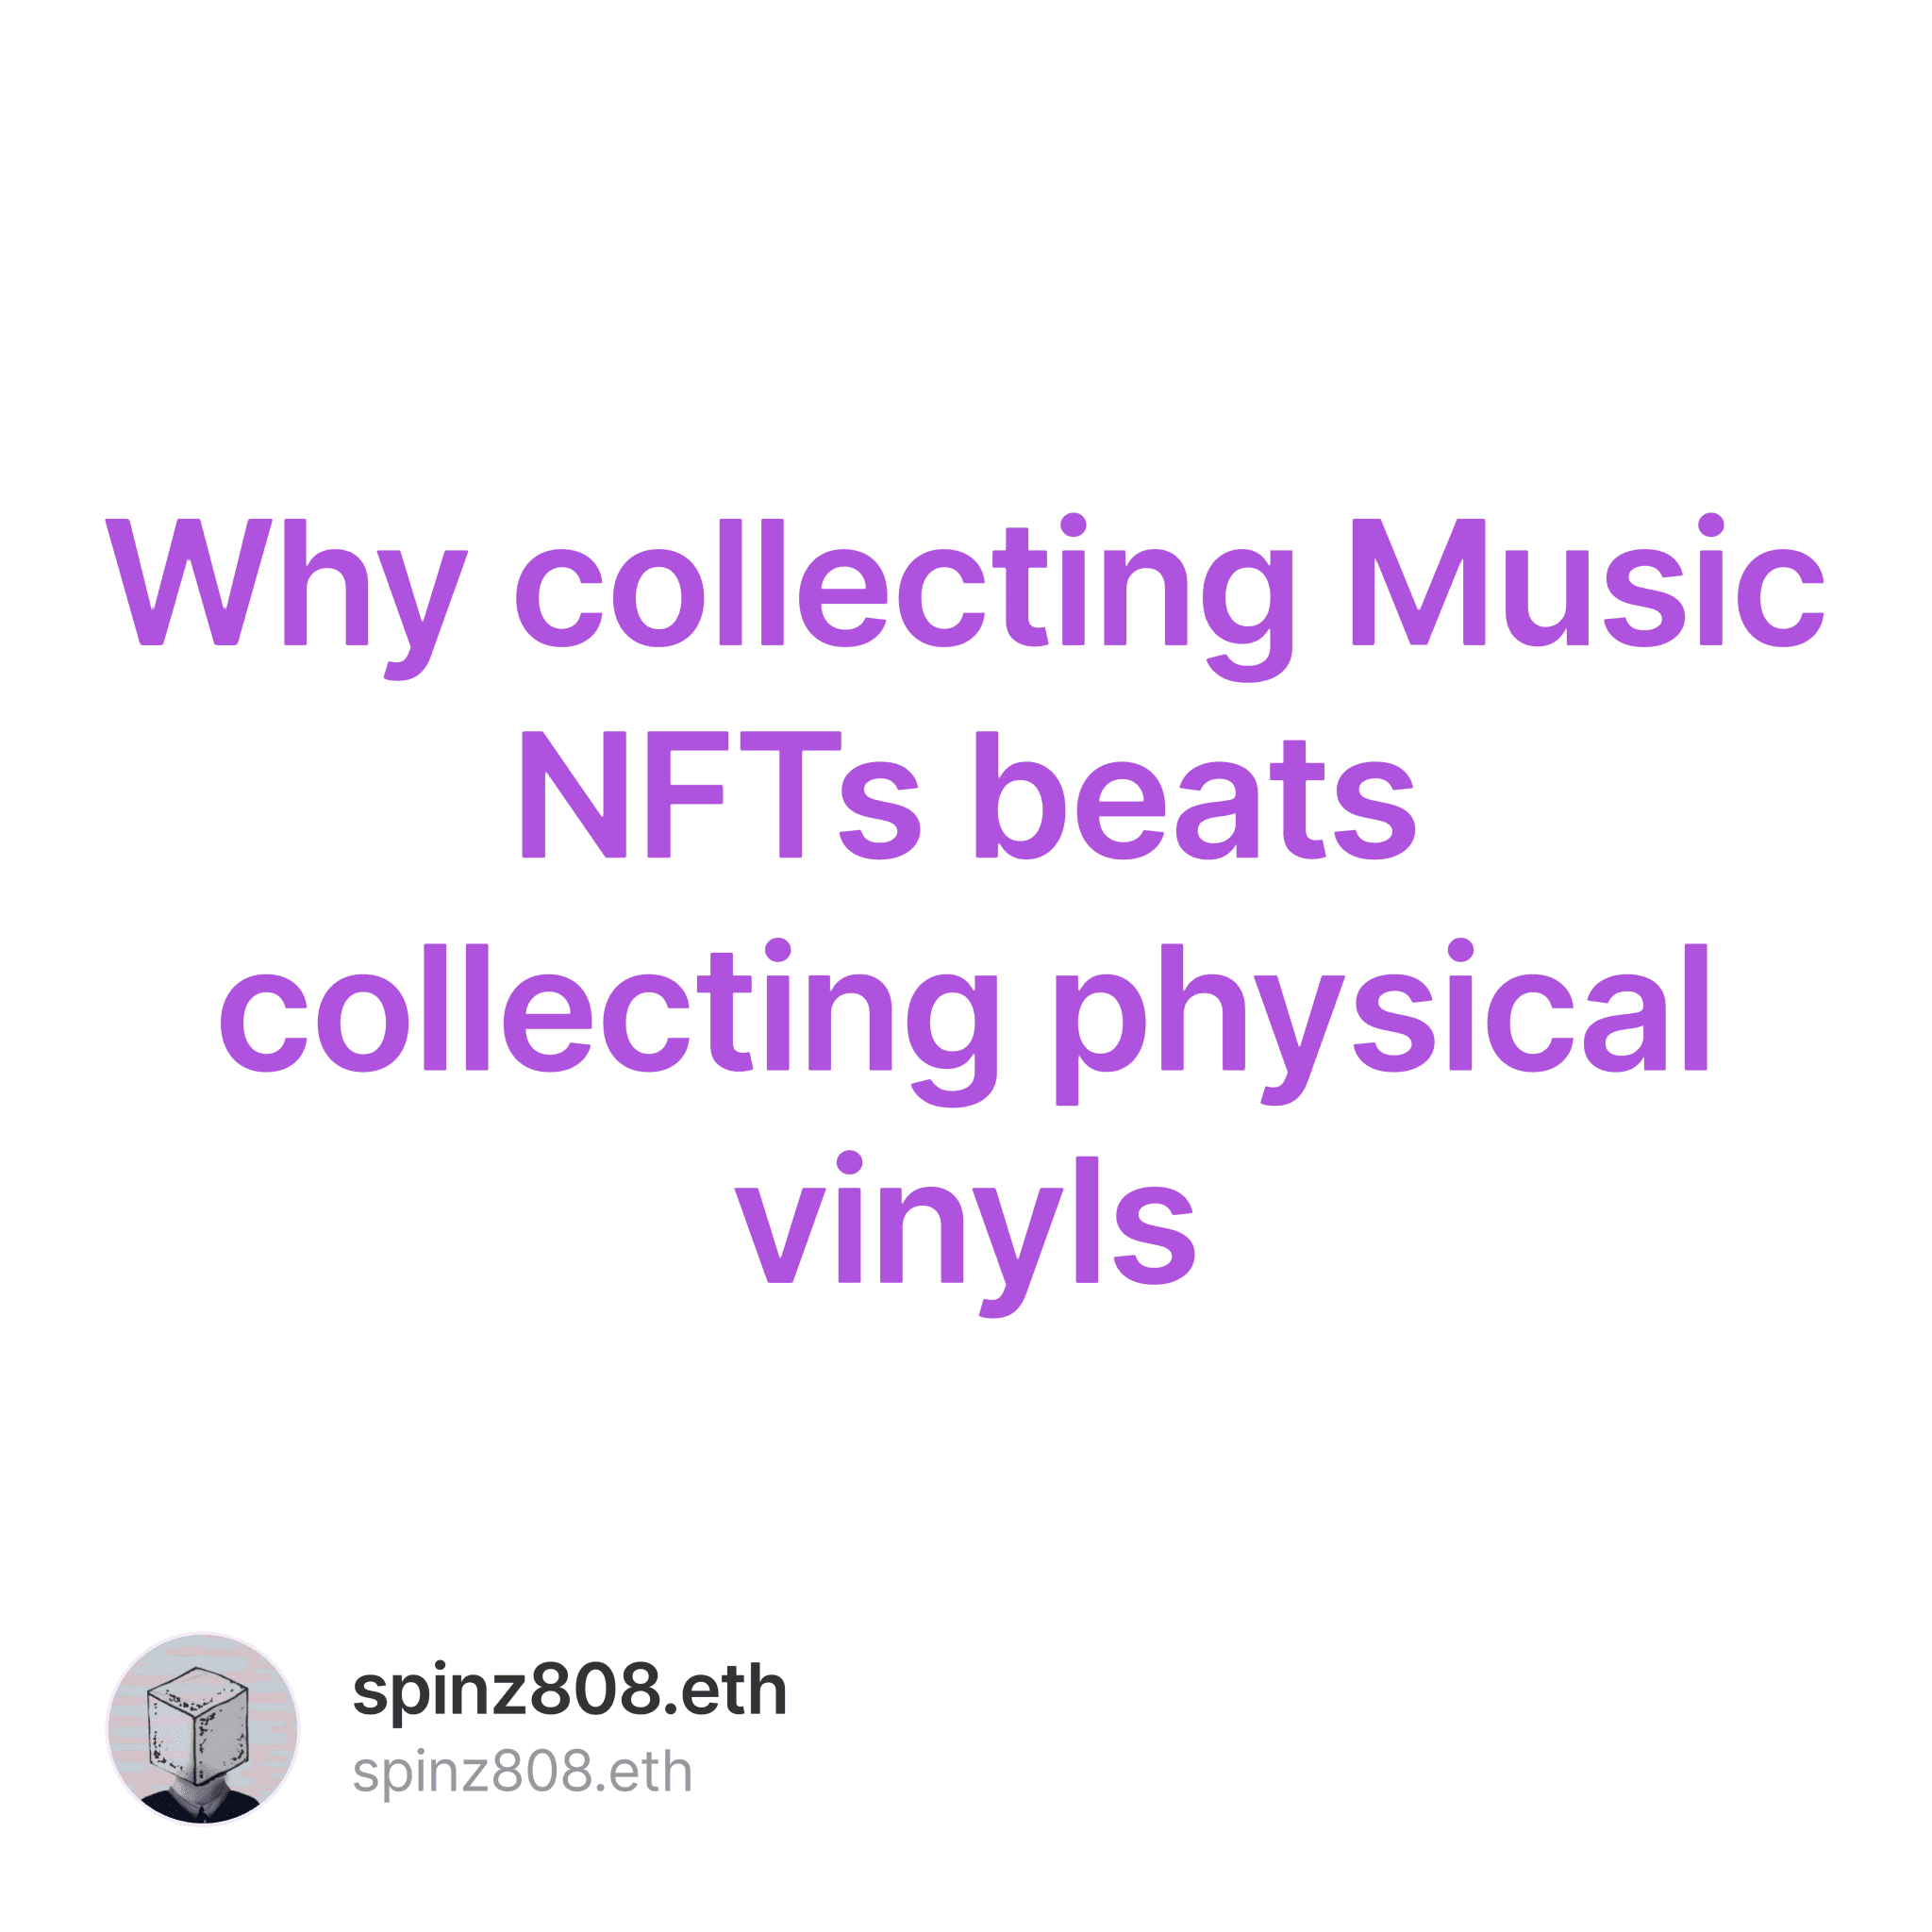 Why collecting Music NFTs beats collecting physical vinyls 33/100